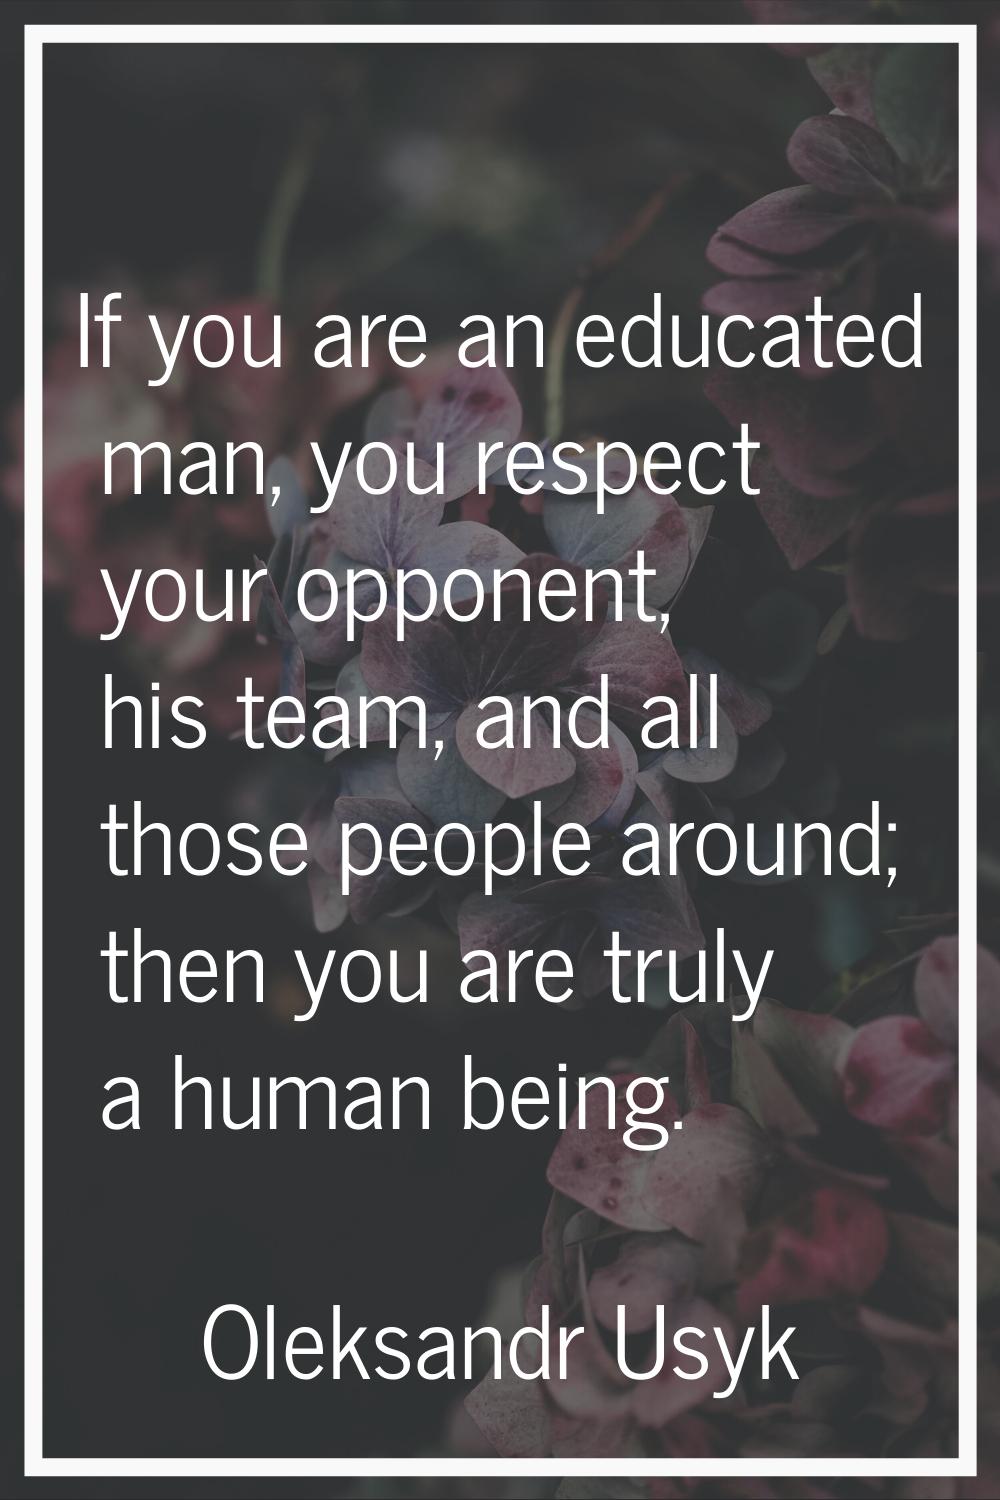 If you are an educated man, you respect your opponent, his team, and all those people around; then 